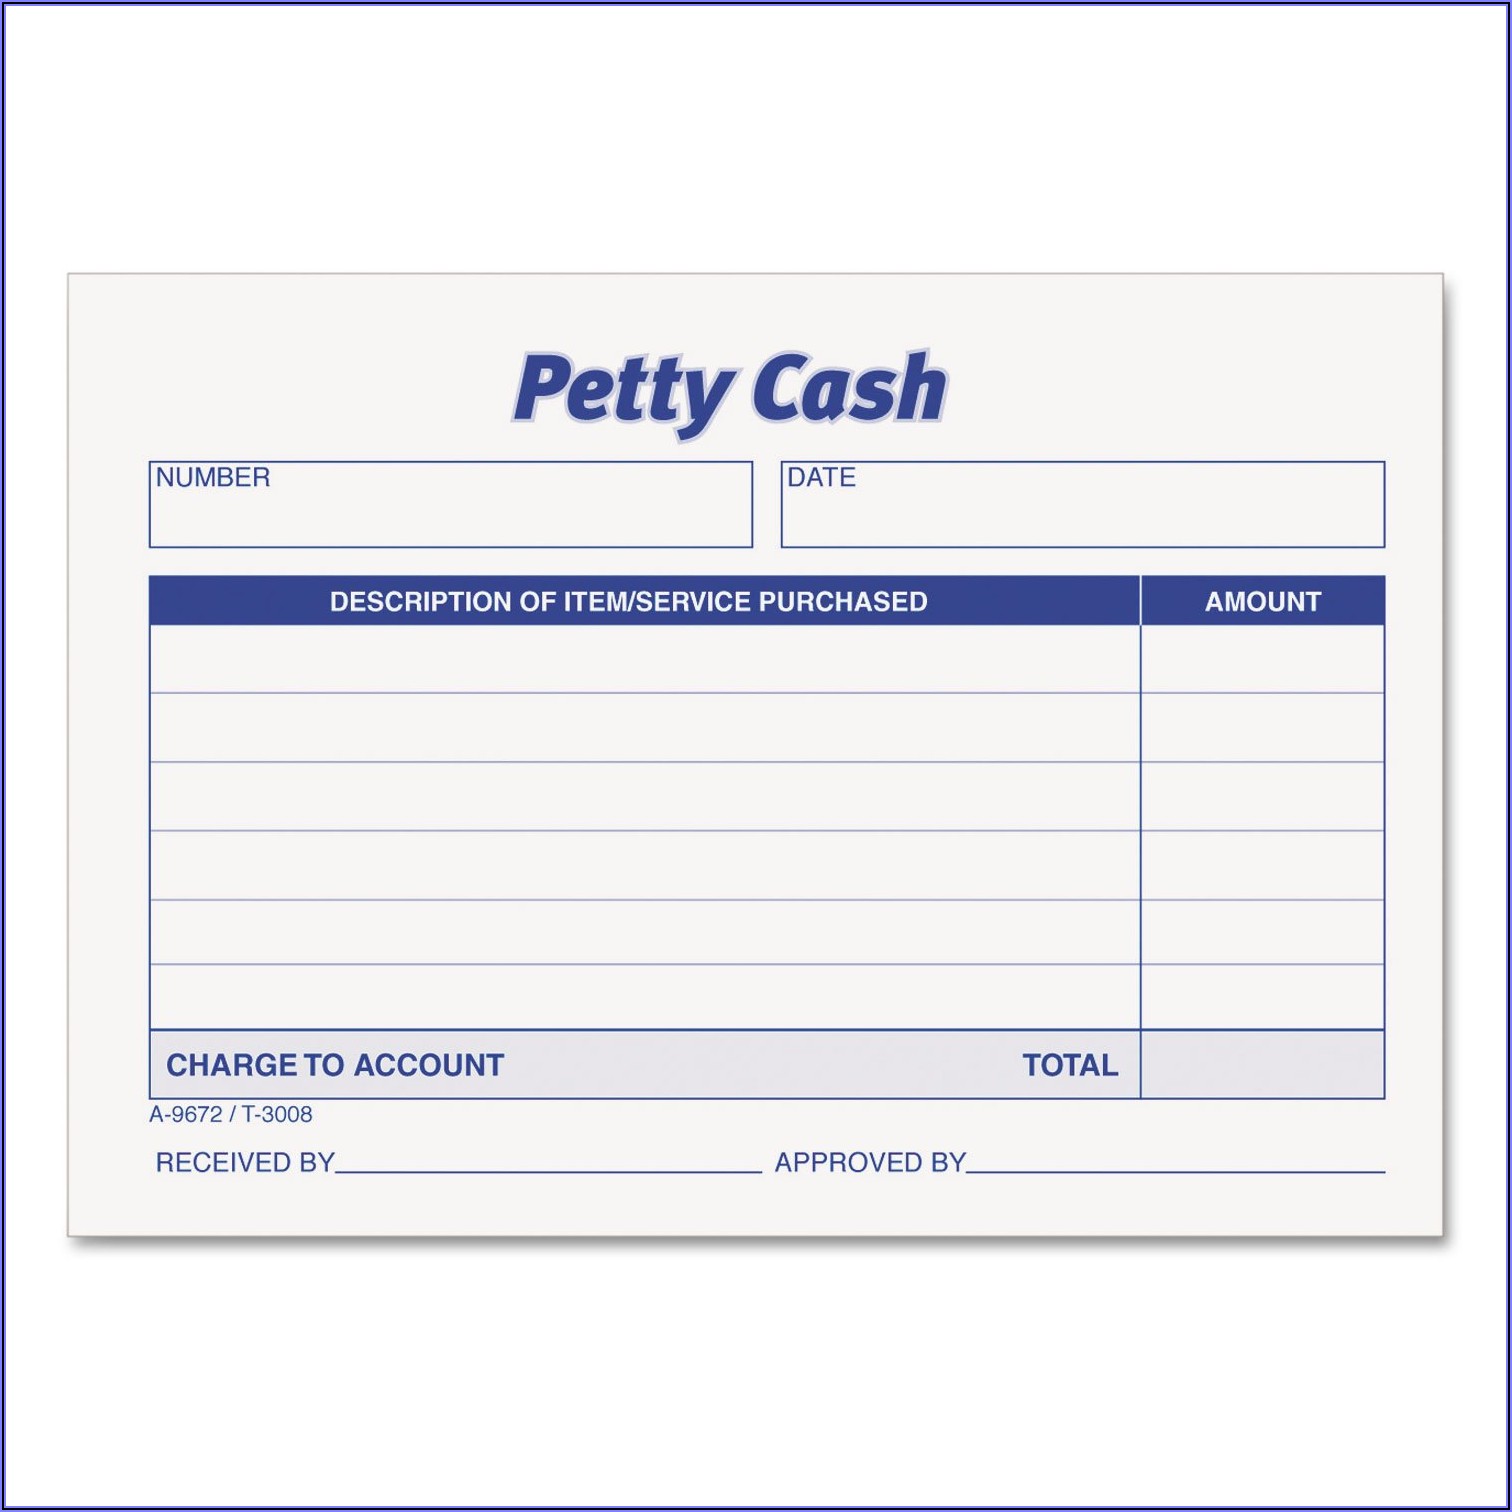 Petty Cash Received Form